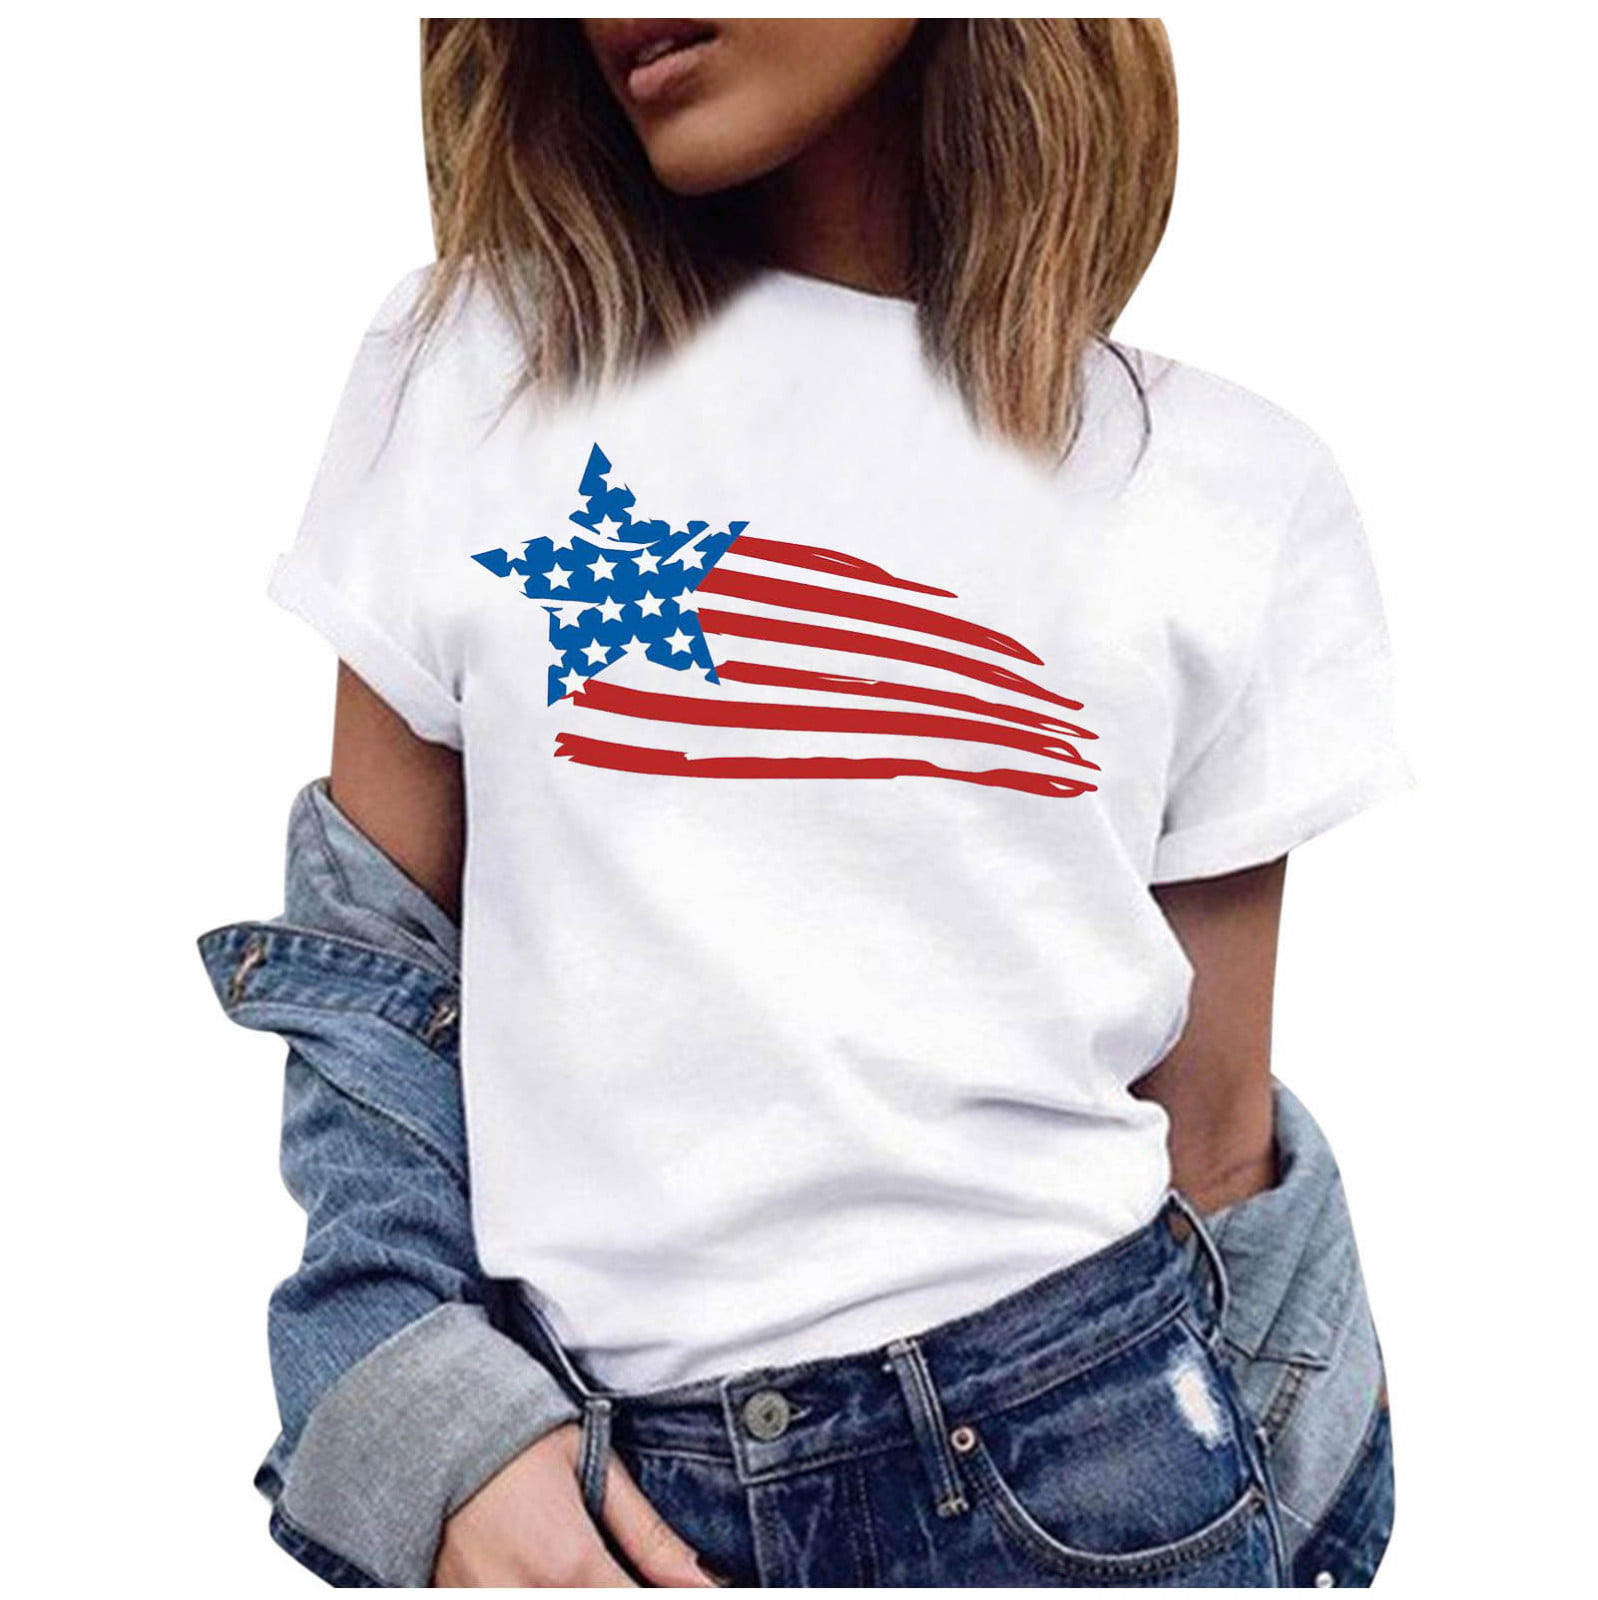 Patriotic Shirt 4th of july stars and stripes american babe shirt flag shirt 4th of July Women's Shirt unisex shirt 4th of July Shirt